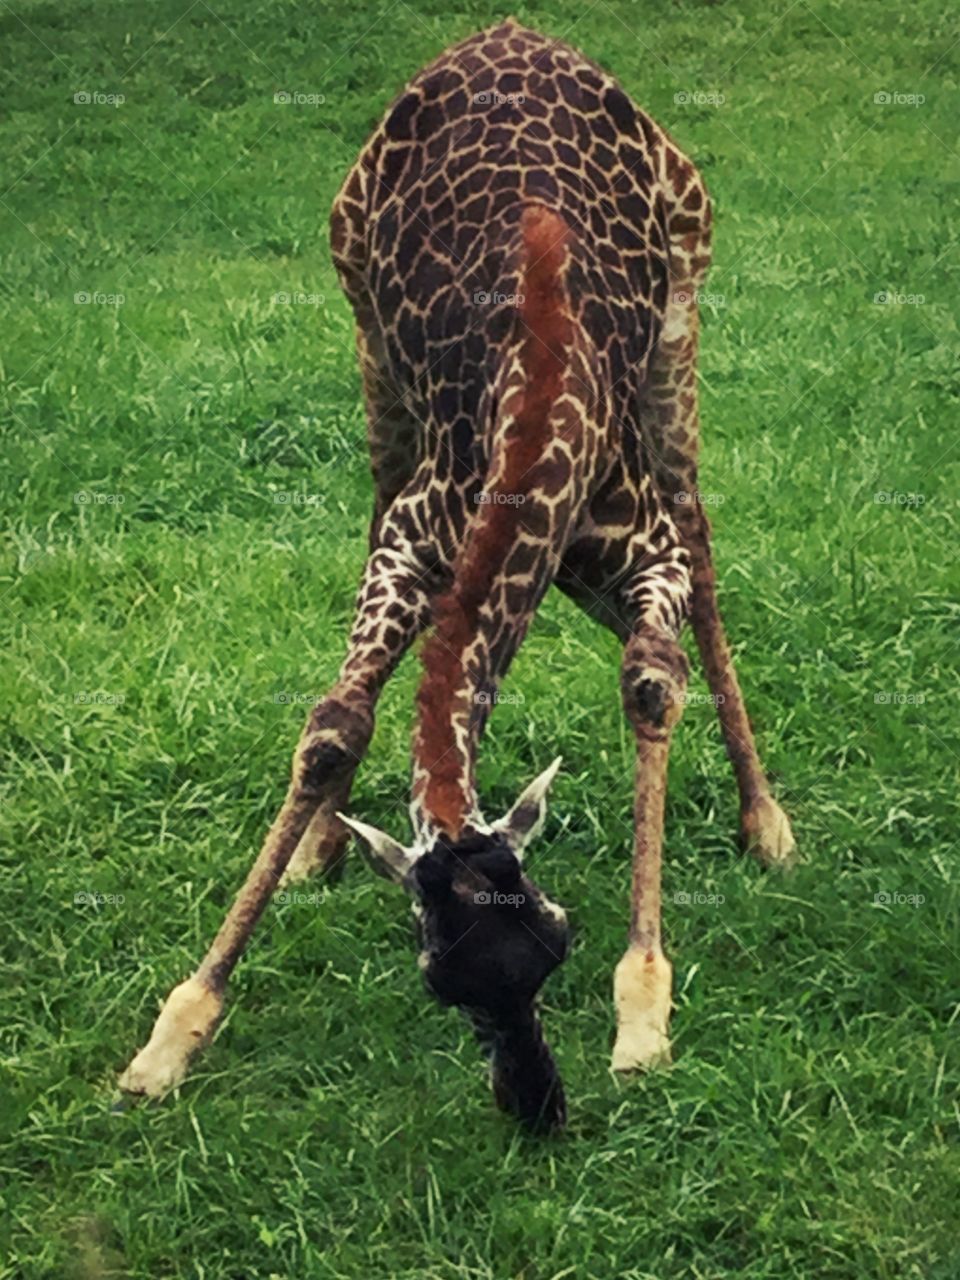 This is a baby giraffe at the Cleveland metro parks zoo.